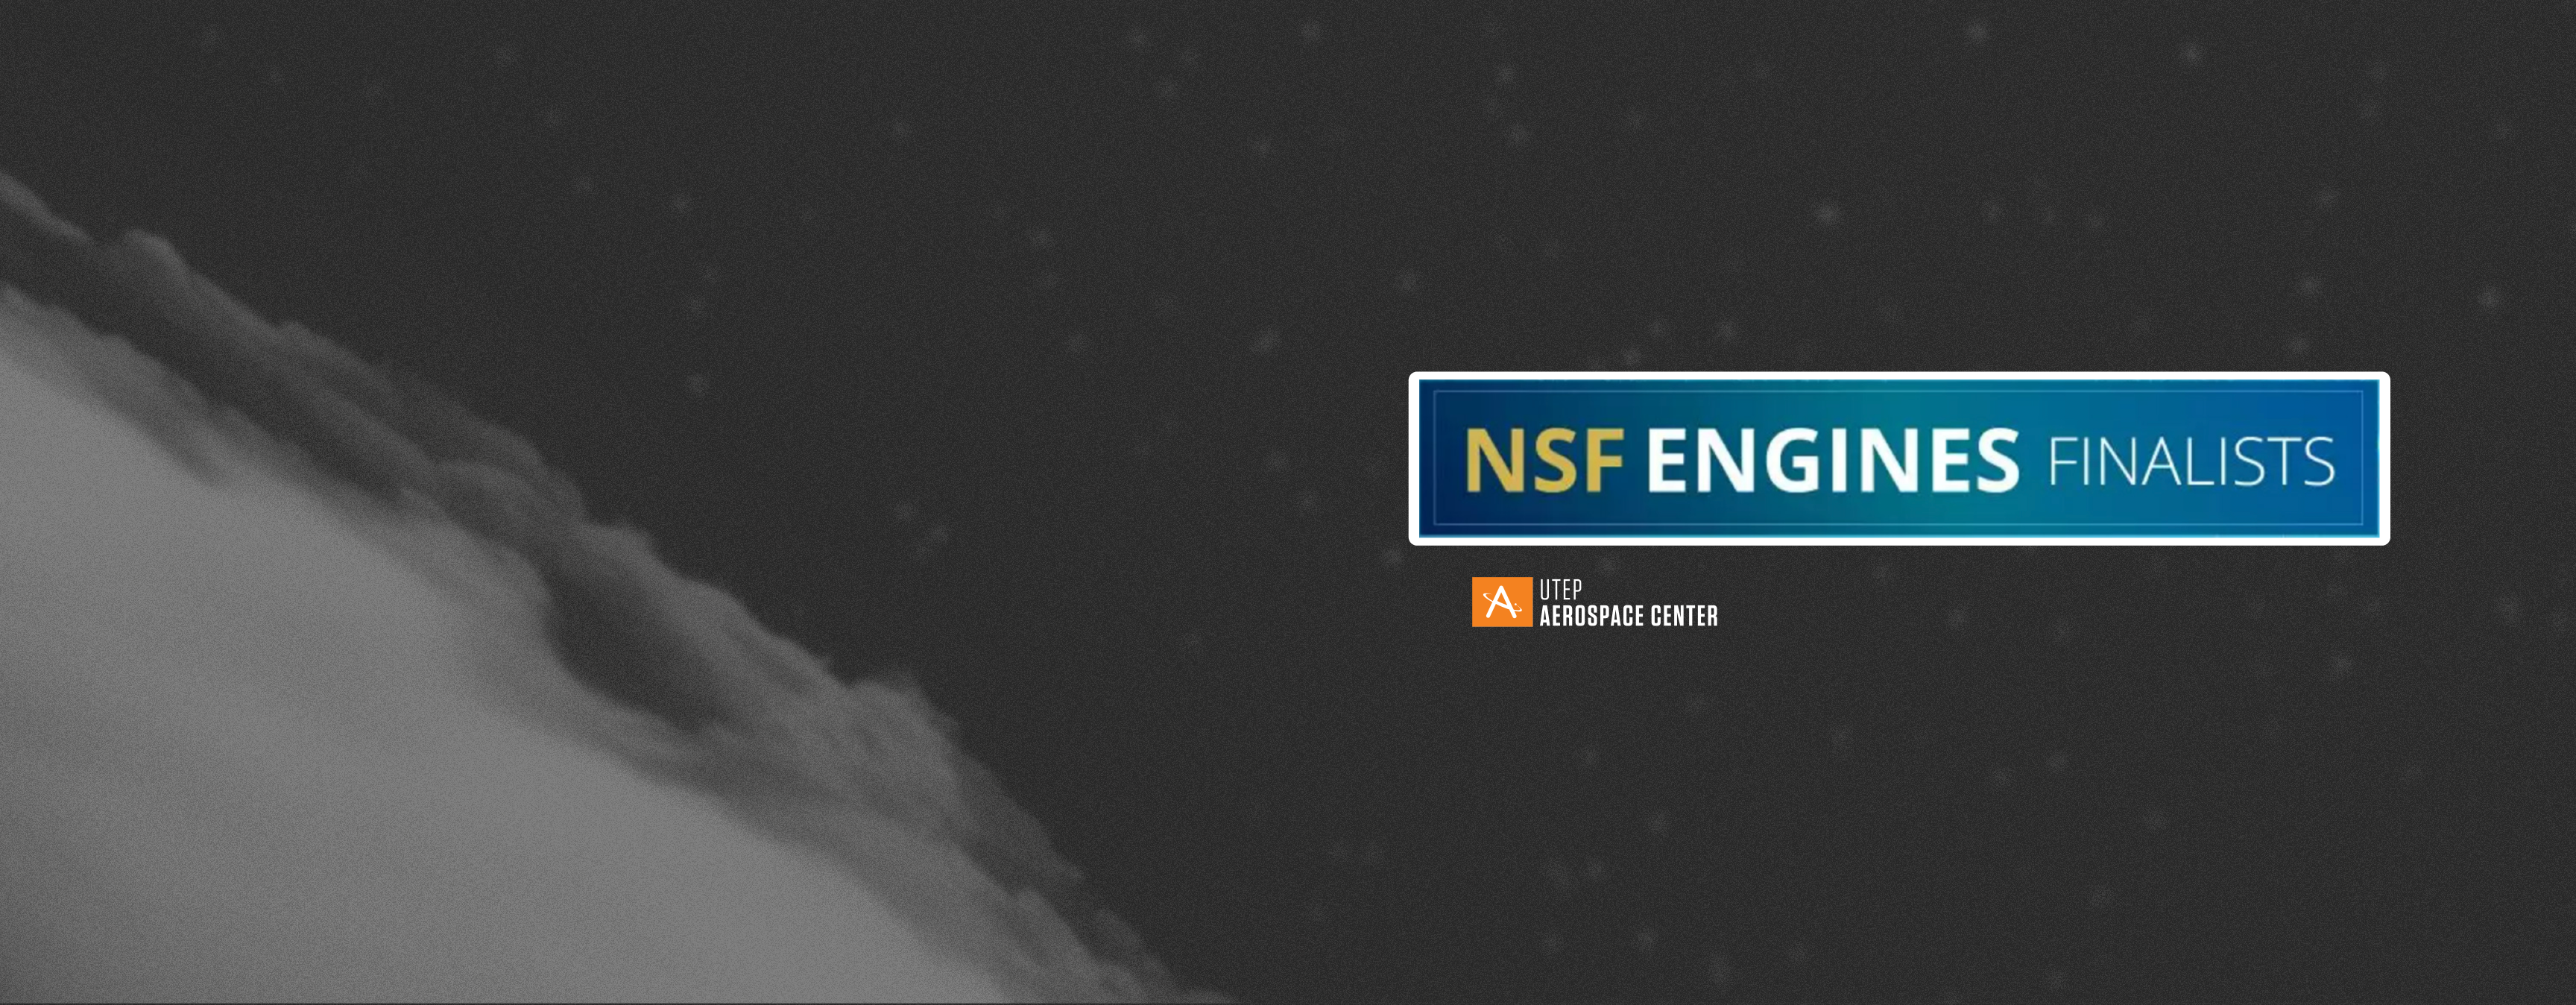 The IDEA Engine Is an NSF Engines Finalist!  